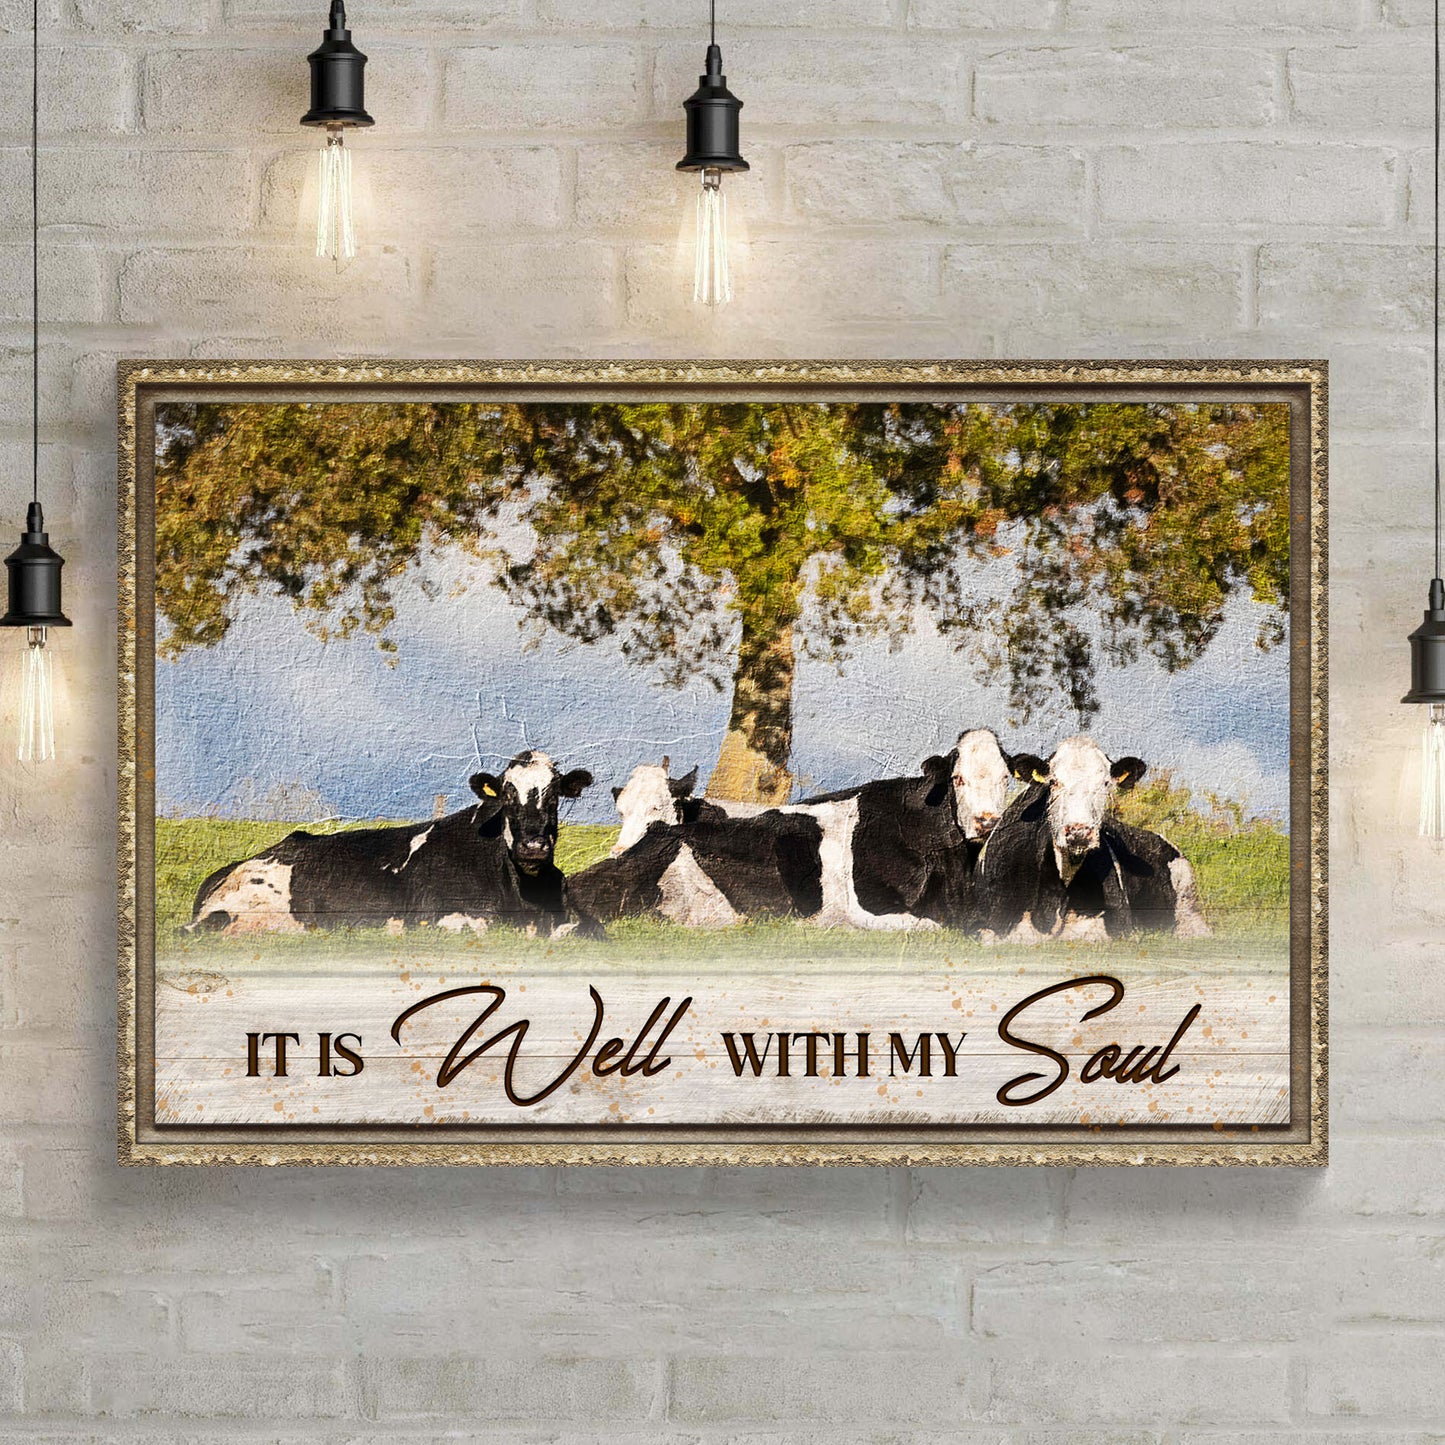 It Is Well With My Soul Cow Sign - Image by Tailored Canvases